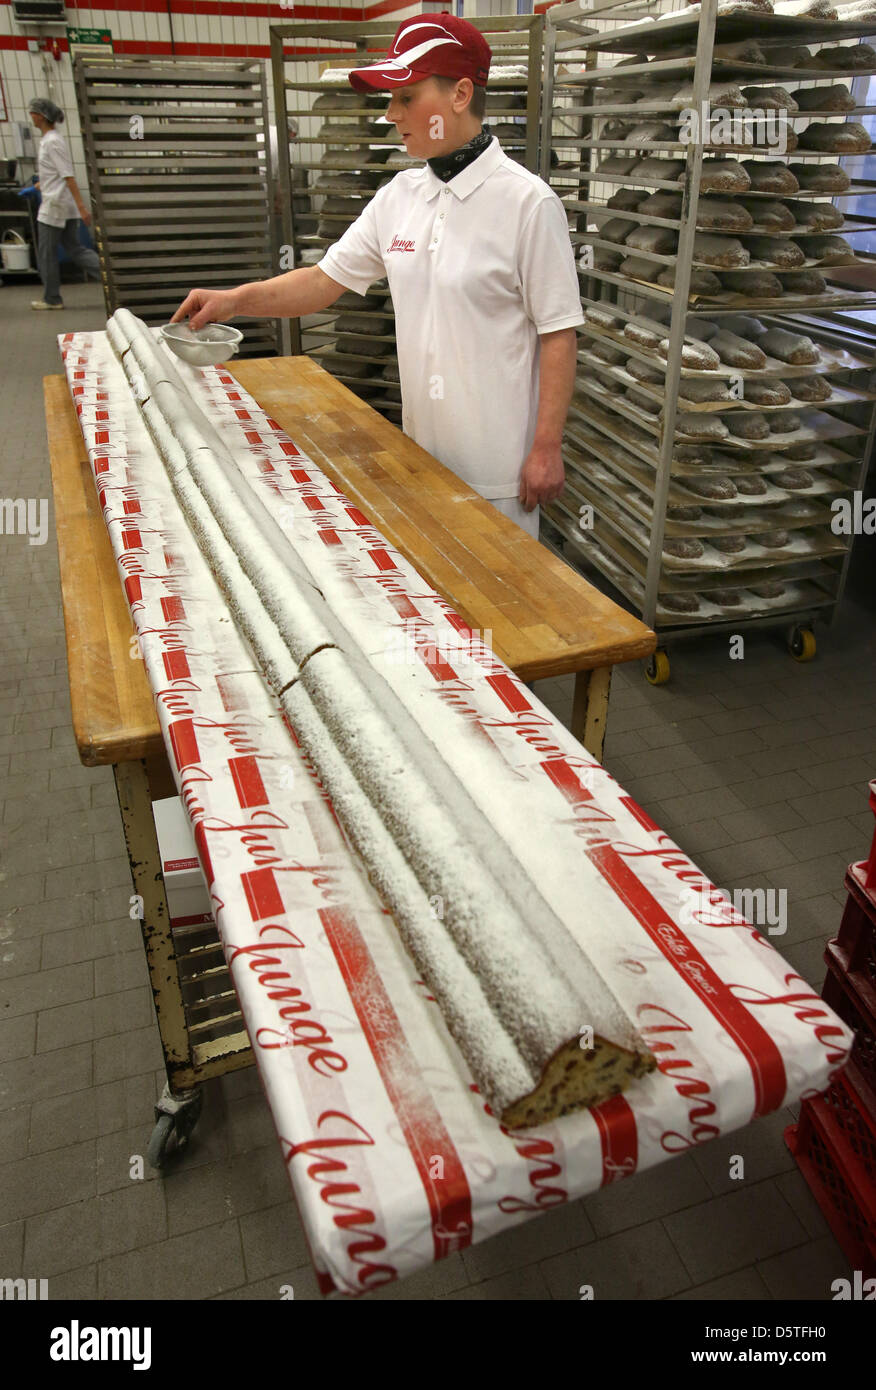 Sandra Jonas dusts the 3.6 m long giant Stollen with icing sugar at the city bakery Junge in Rostock, Germany, 23 November 2012. The fruit cake will be cut and handed out for free on 24 November 2012. It is baked according to a top secret family recipe from 1897. Photo: Bernd Wuestneck Stock Photo